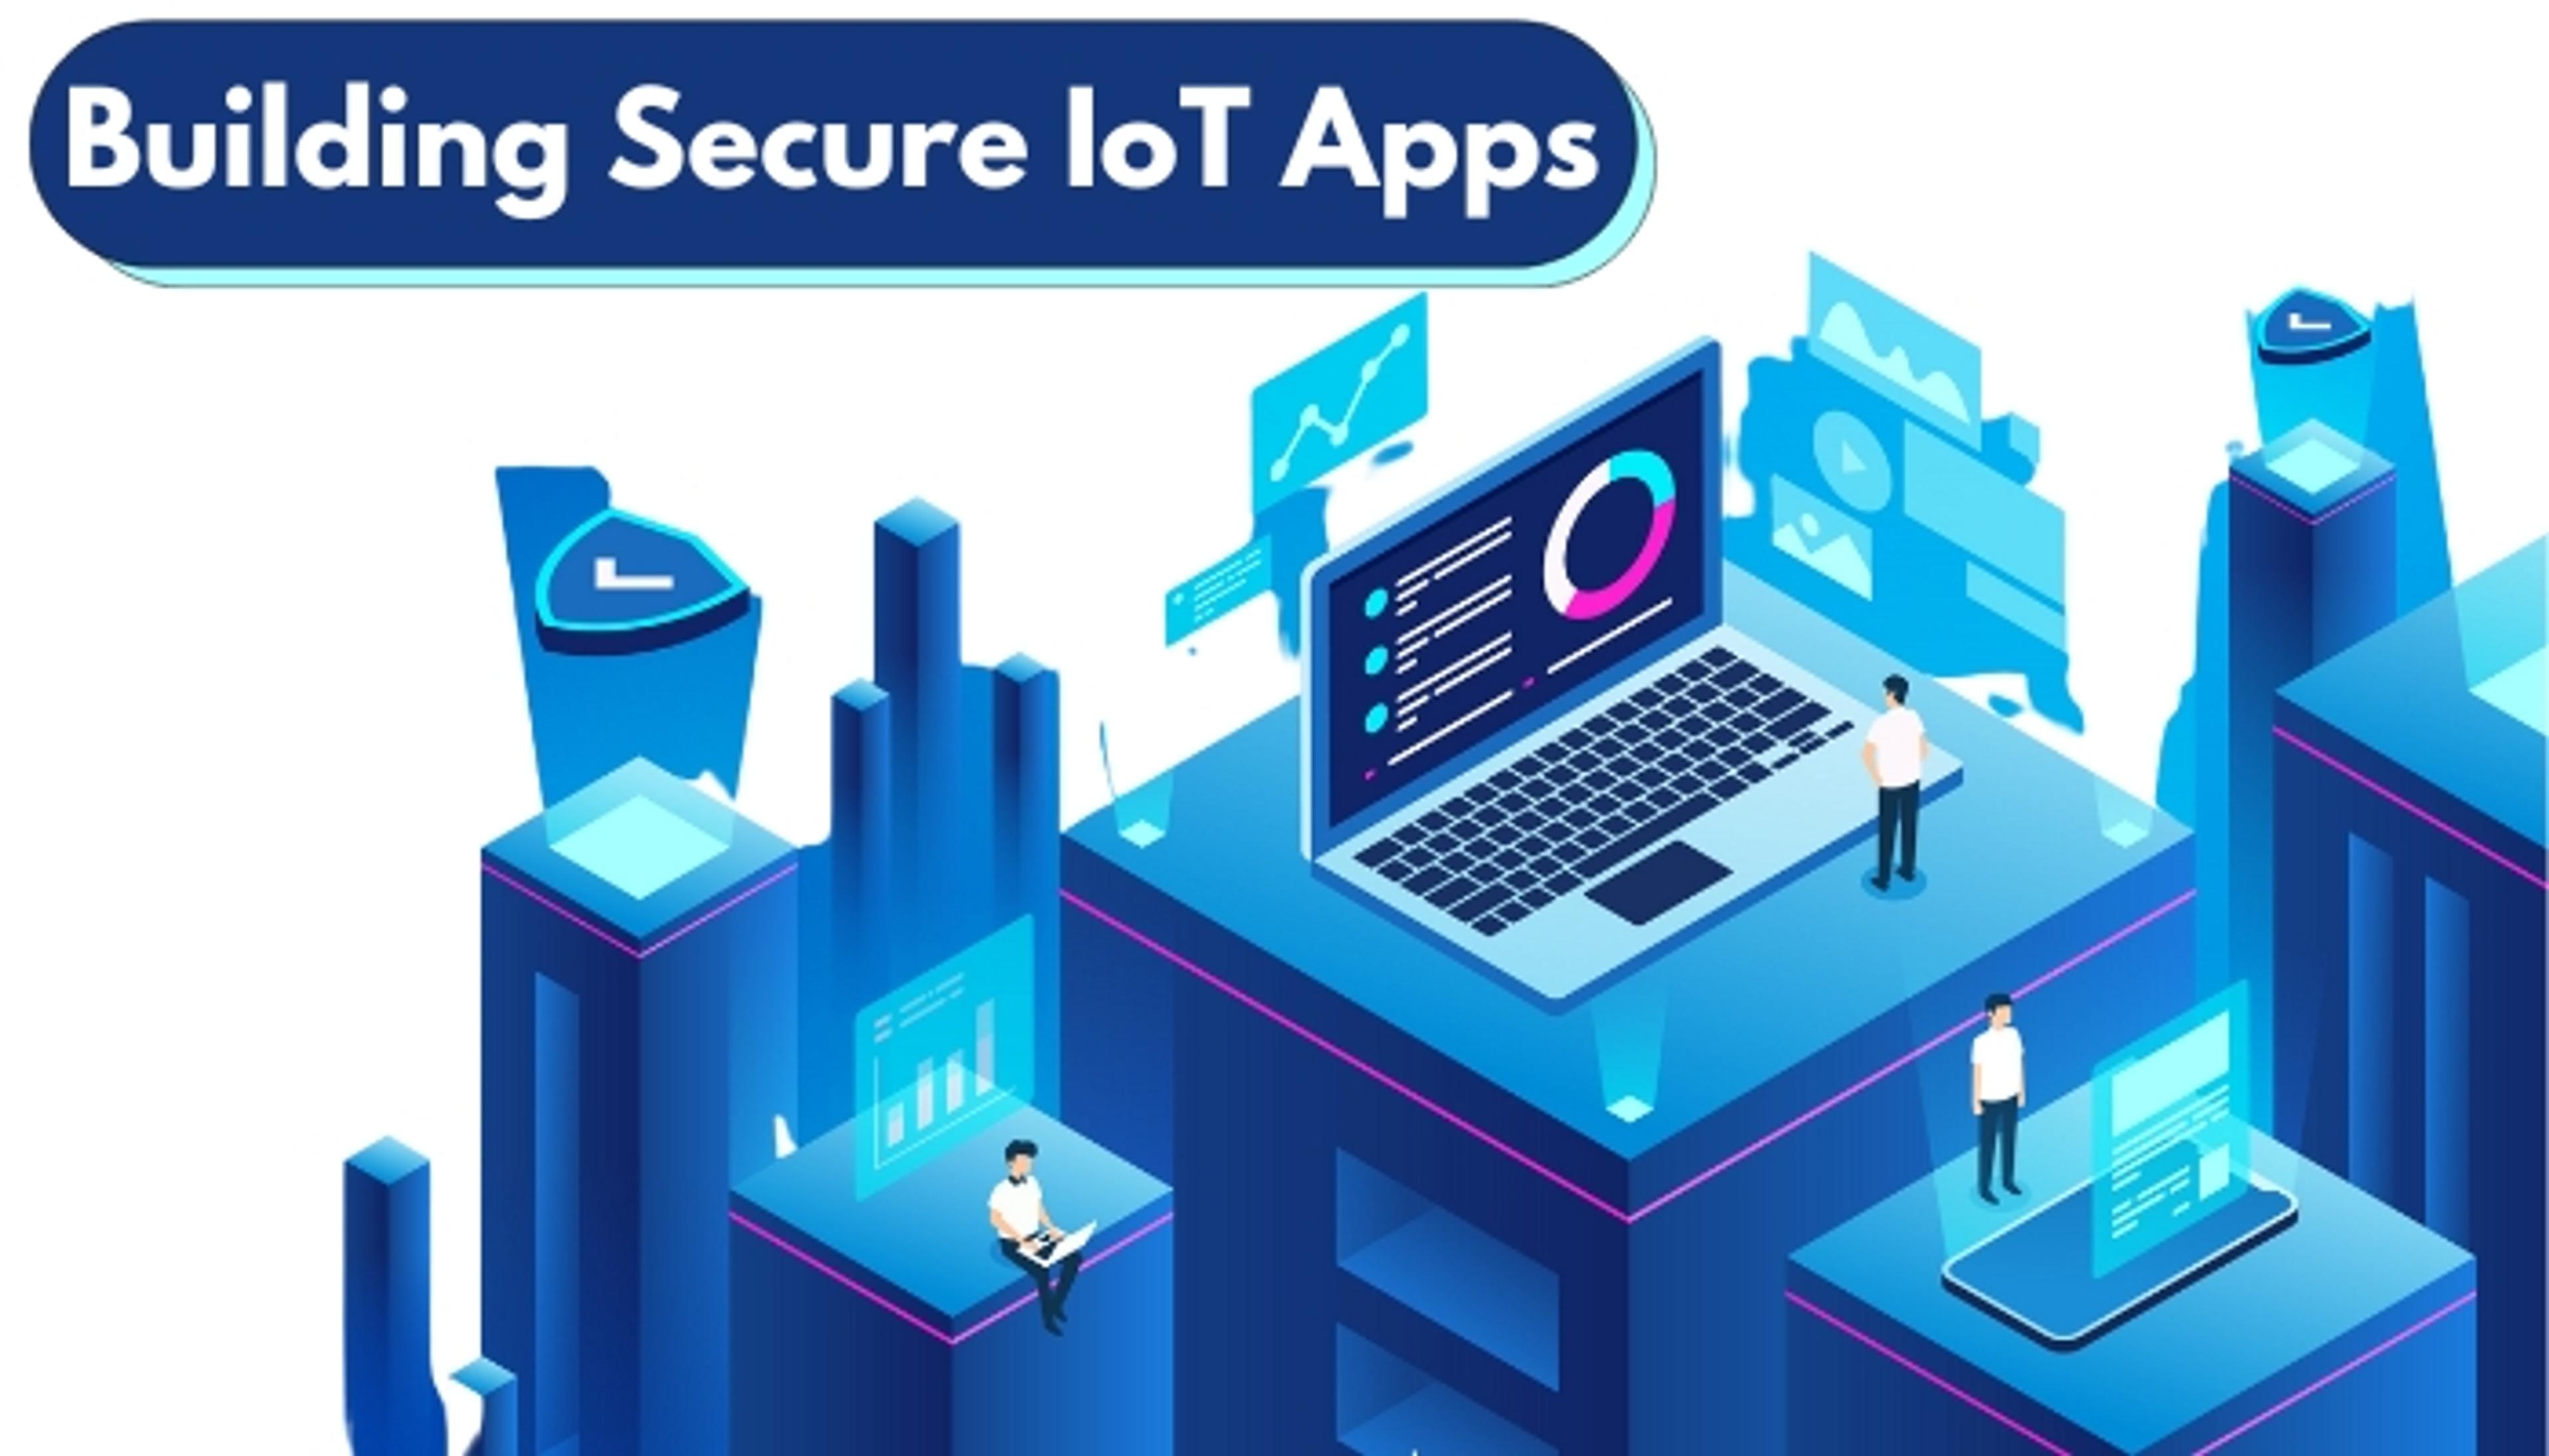 Building Secure IoT Apps